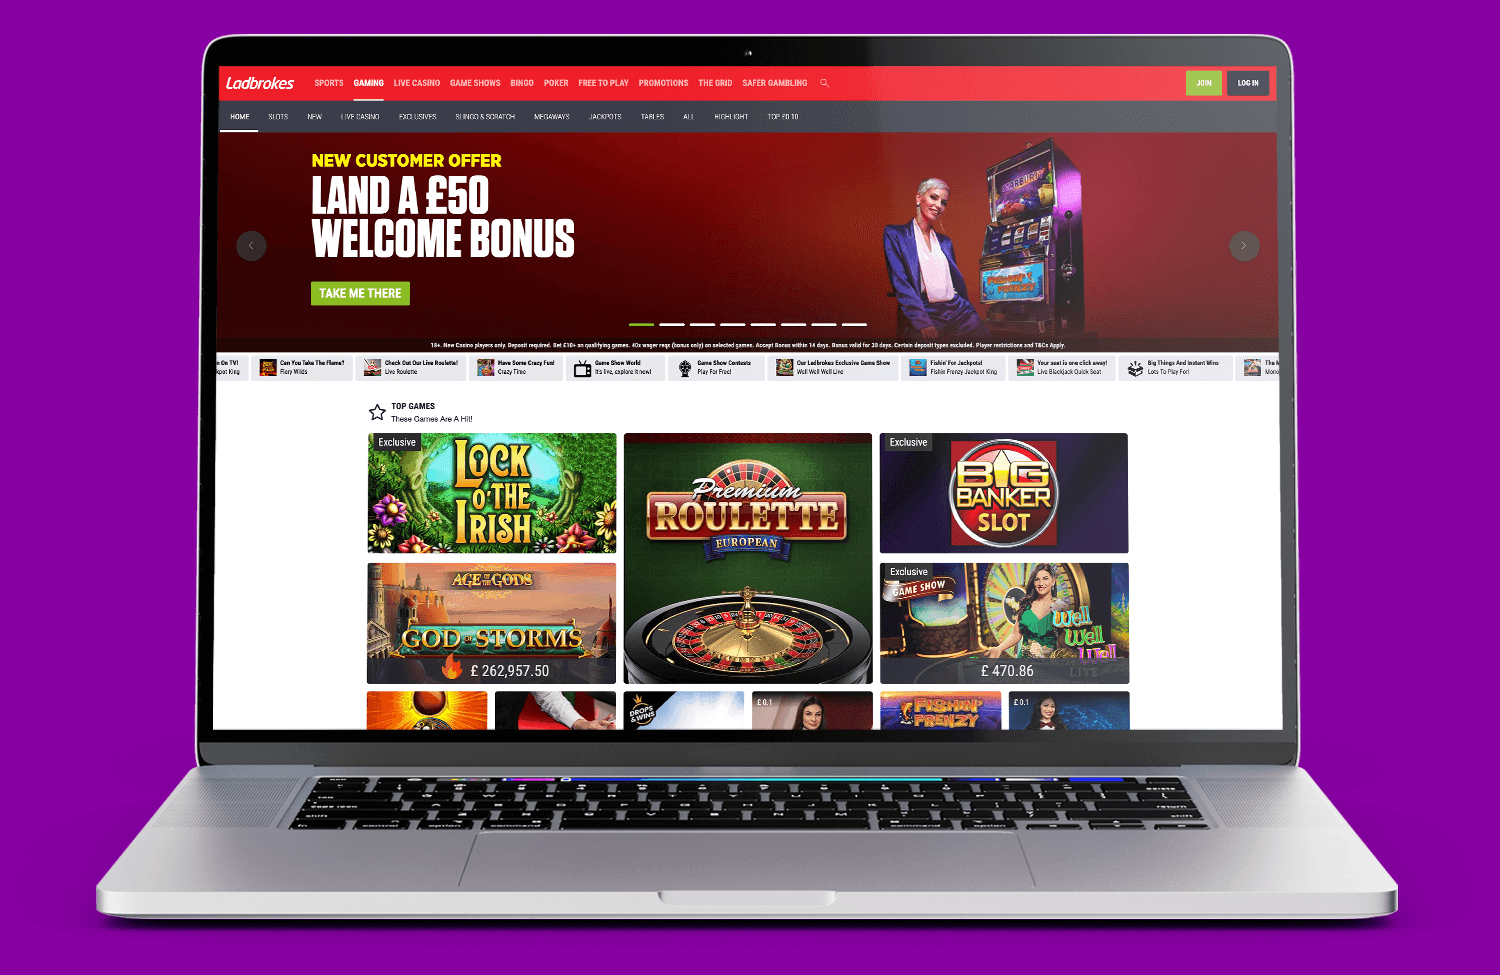 Image of laptop with Ladbrokes website on screen